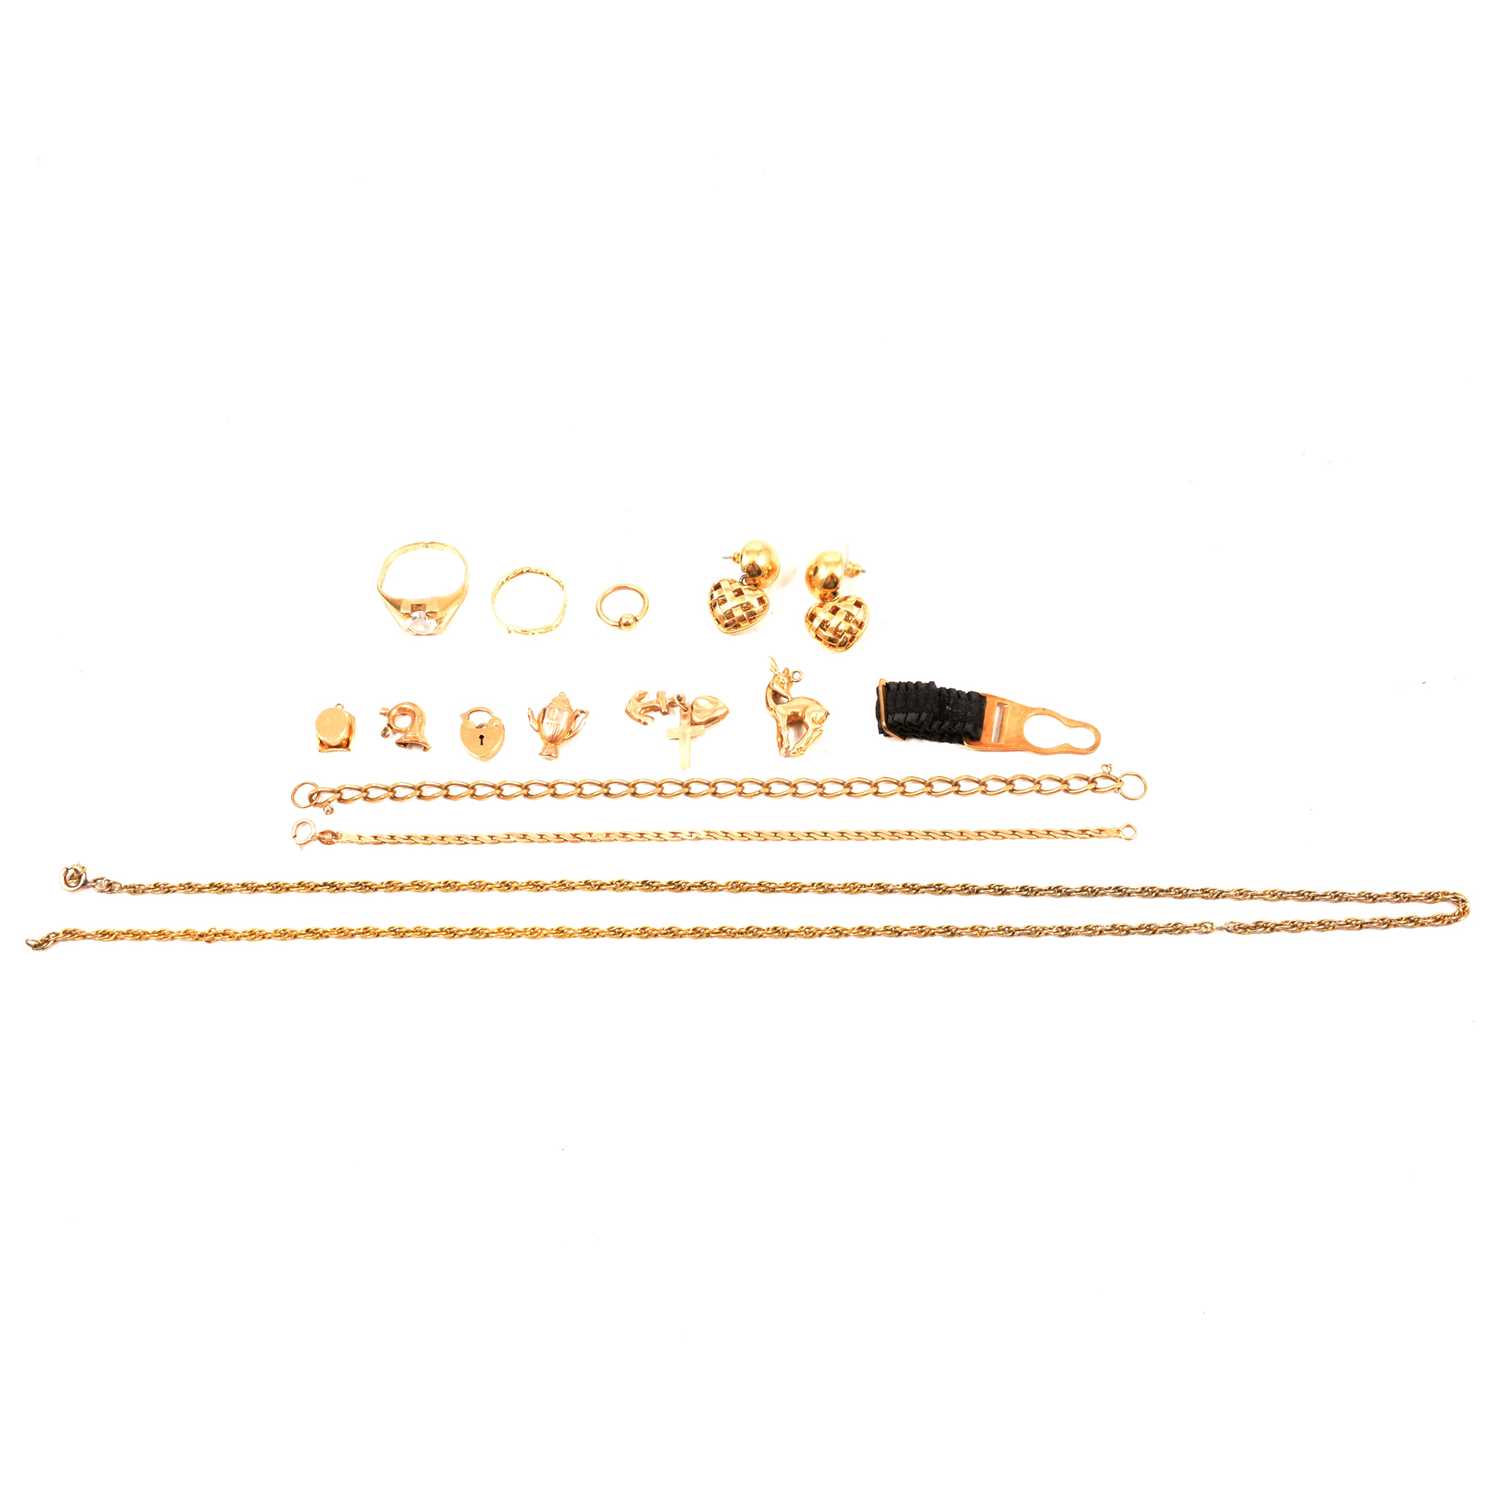 Lot 140 - A 9 carat yellow gold bracelet, chain, charms, rings, and other yellow metal and costume jewellery.